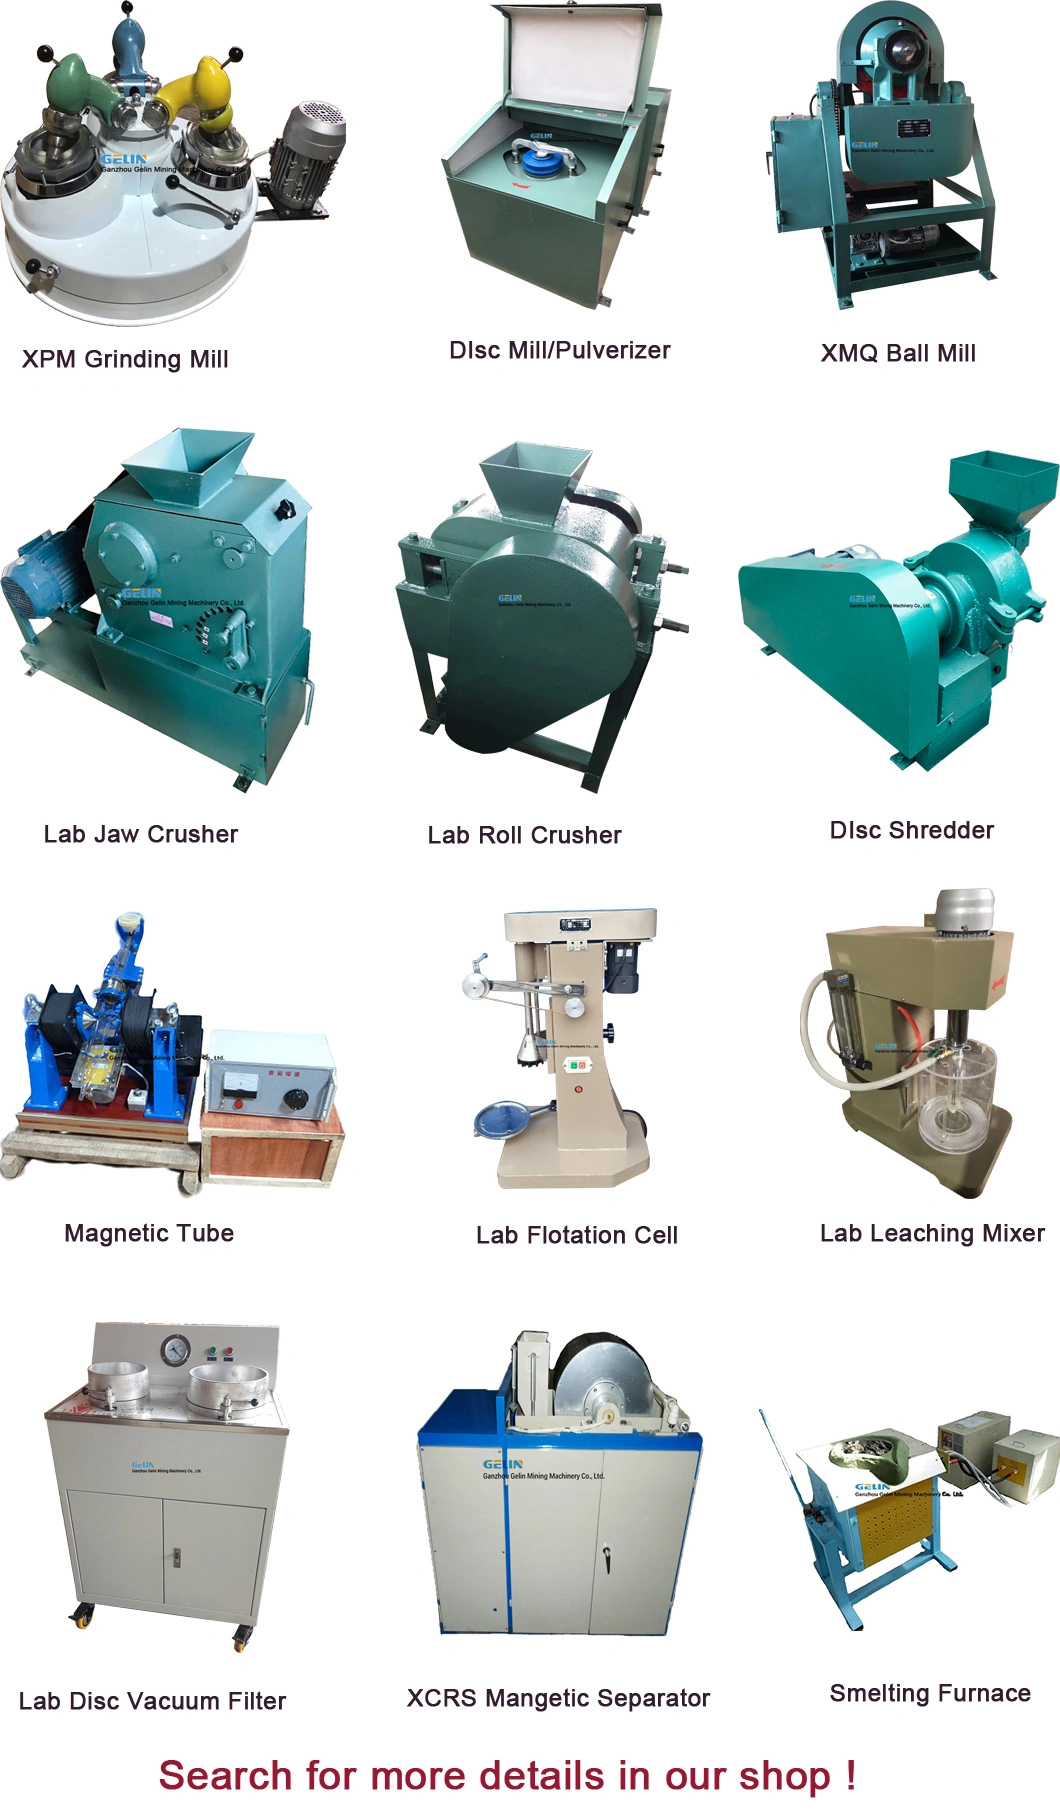 Lab Disk Vacuum Filter Machine for Mineral Dewatering